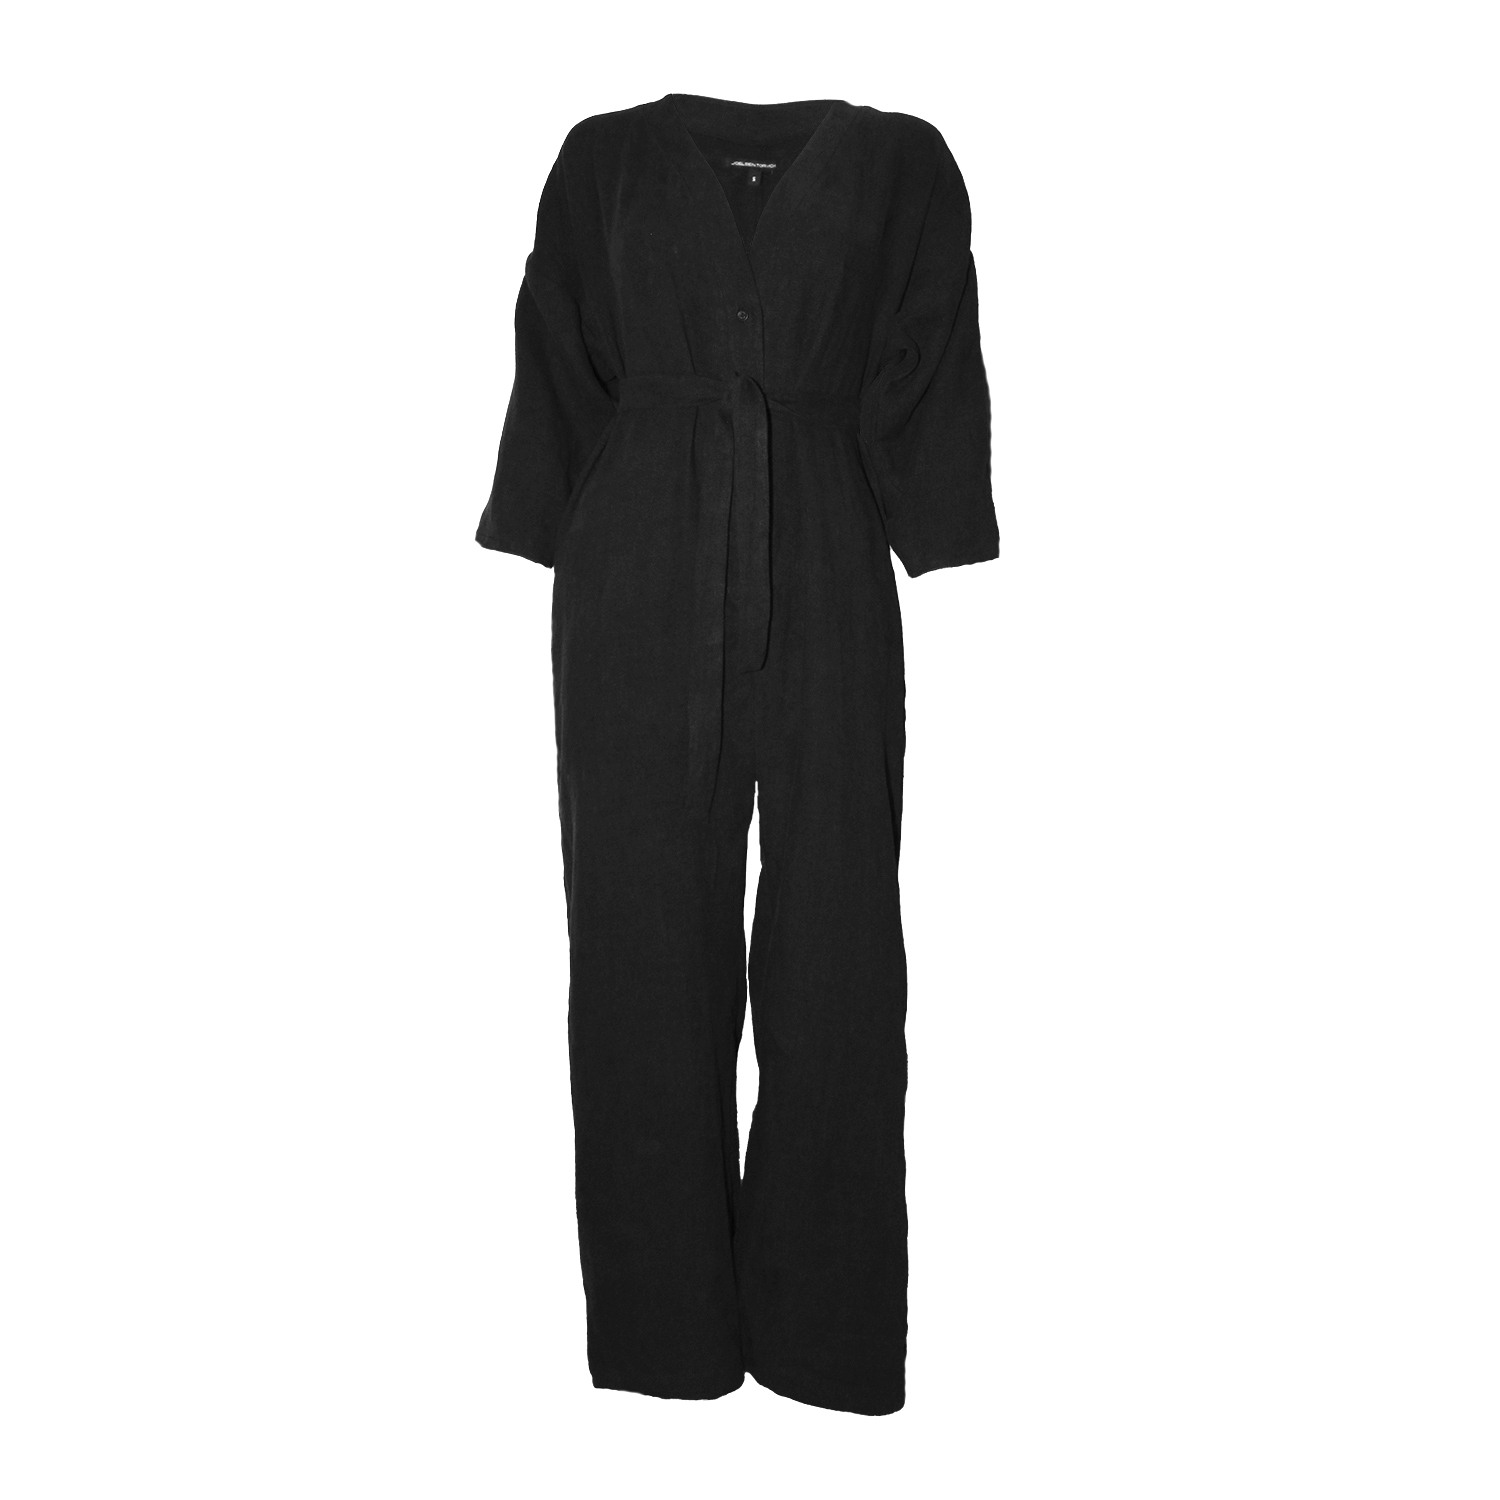 Women’s Wide Leg Button Down Belted Jumpsuit - Black Extra Small Joeleen Torvick